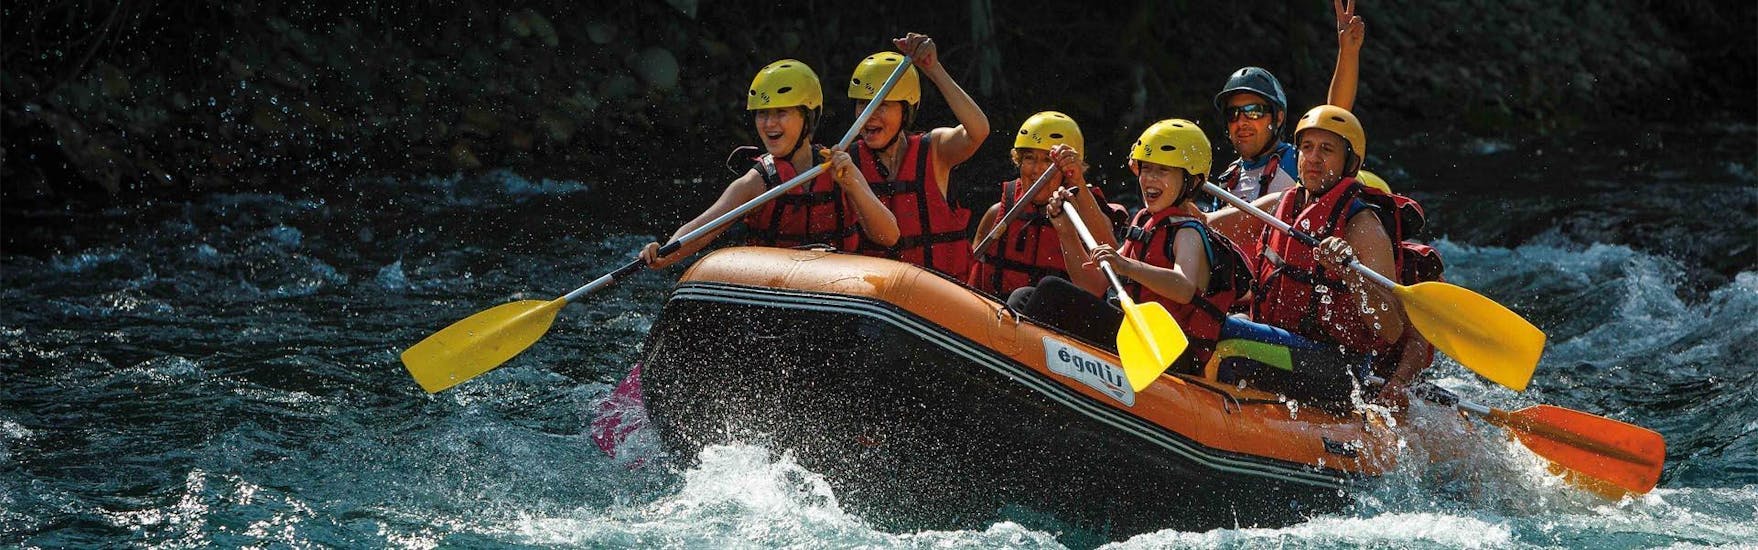 A group paddles while laughing on their raft during the activity Rafting on the Garonne - Discovery with H2O vives.